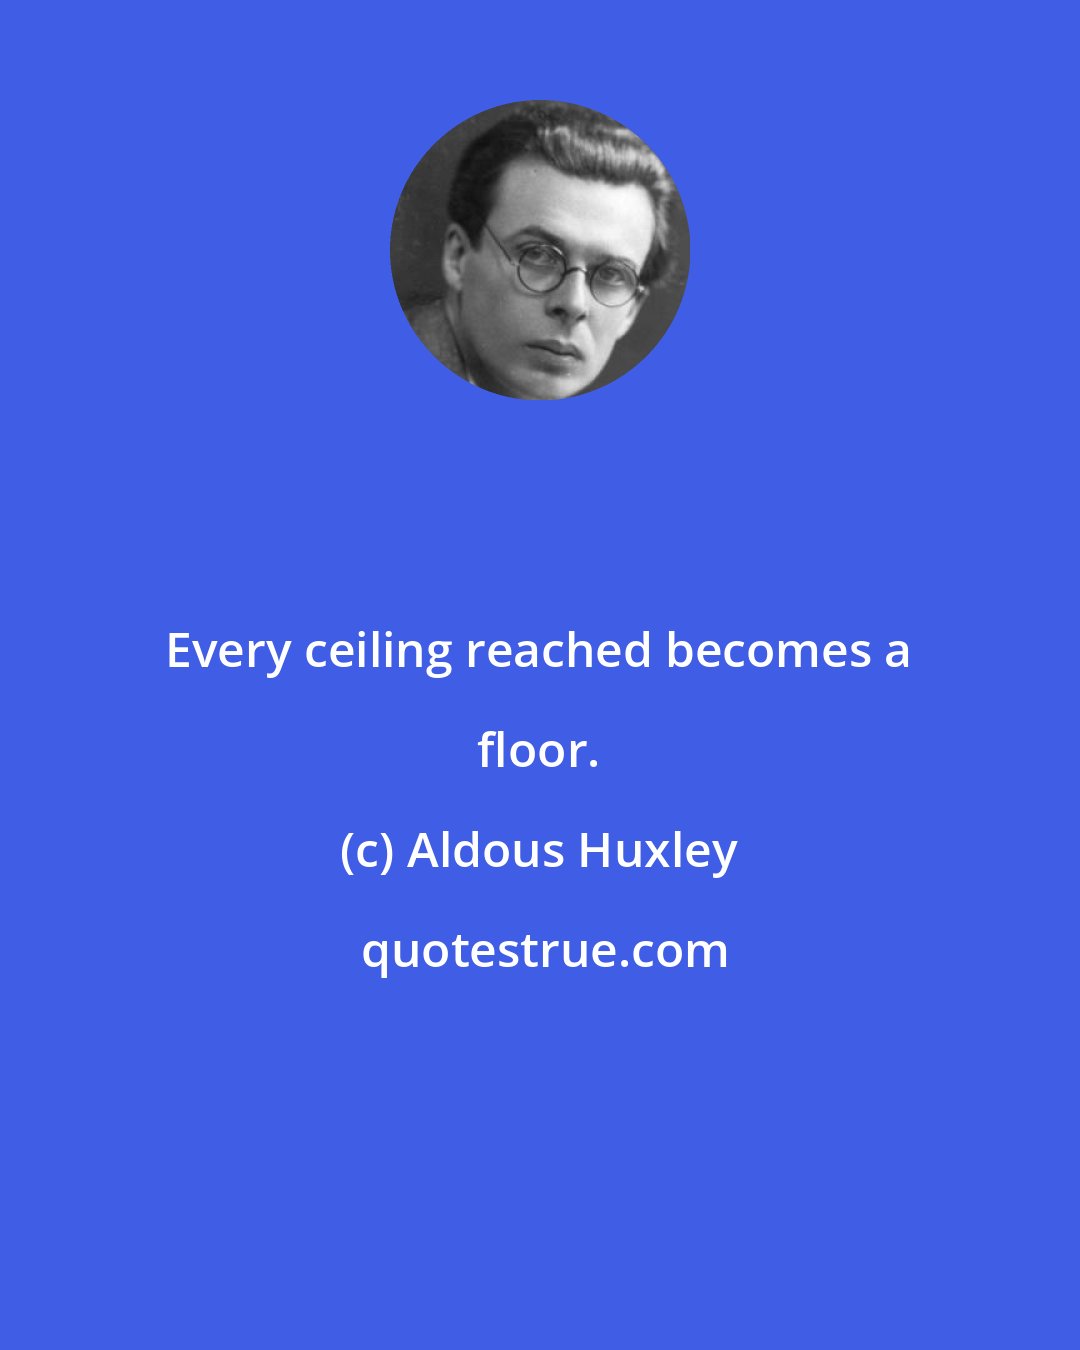 Aldous Huxley: Every ceiling reached becomes a floor.